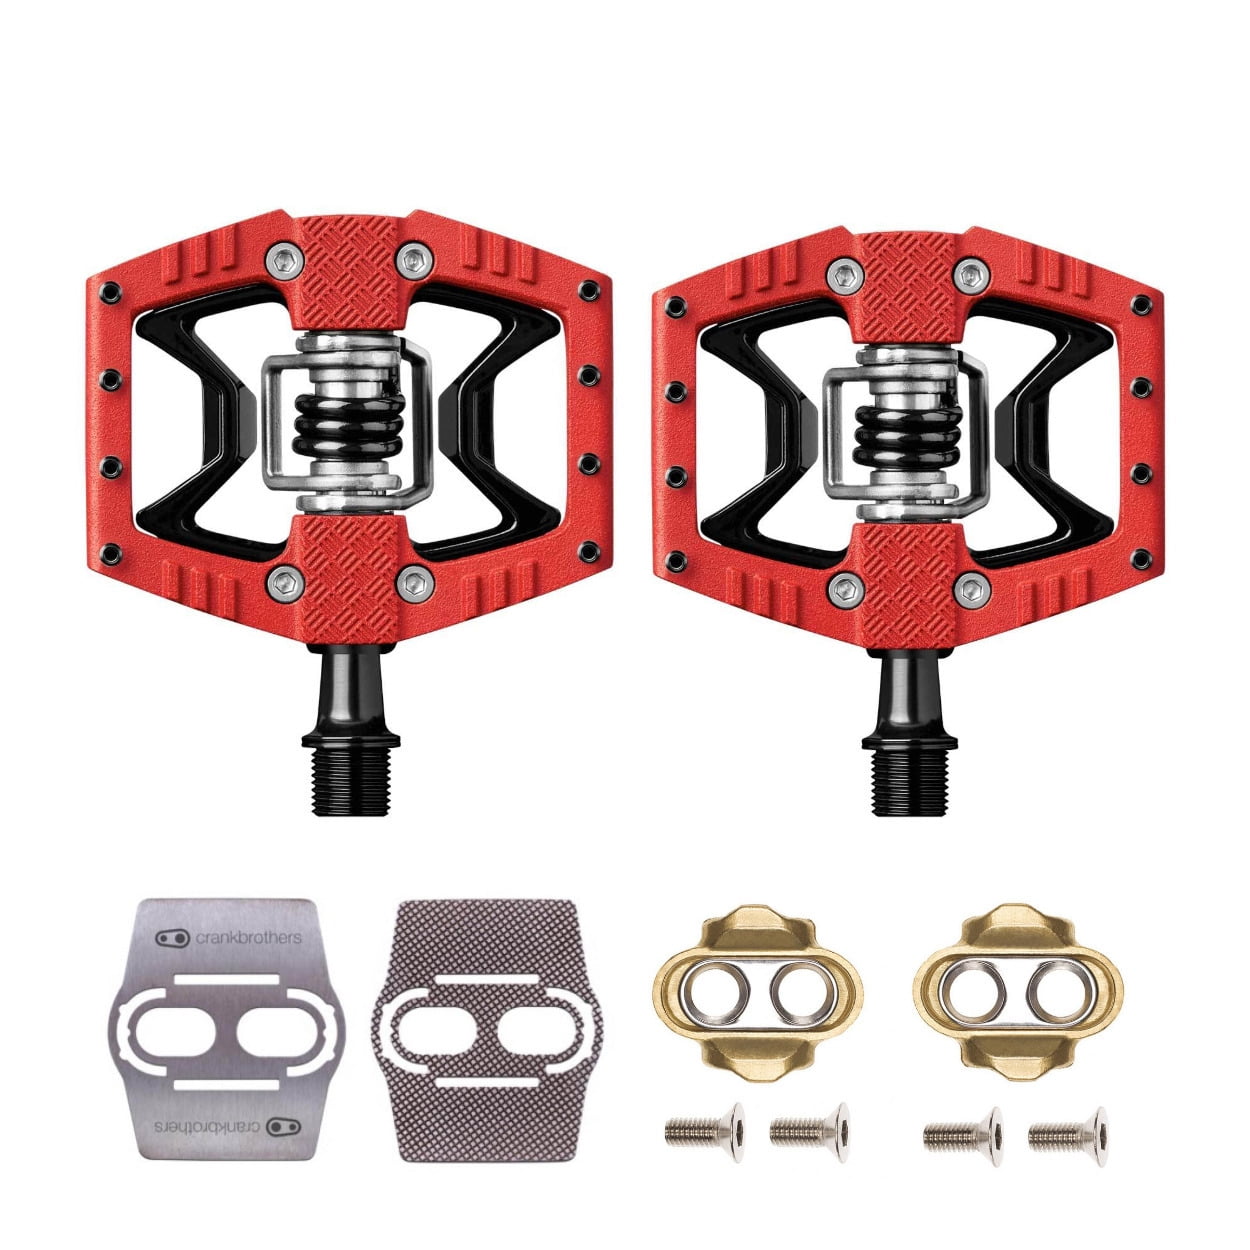 Vul in Laag Overdreven Crankbrothers Double Shot 3 Bike Pedals (Red/Black) with Cleats and Shoe  Shields - Walmart.com